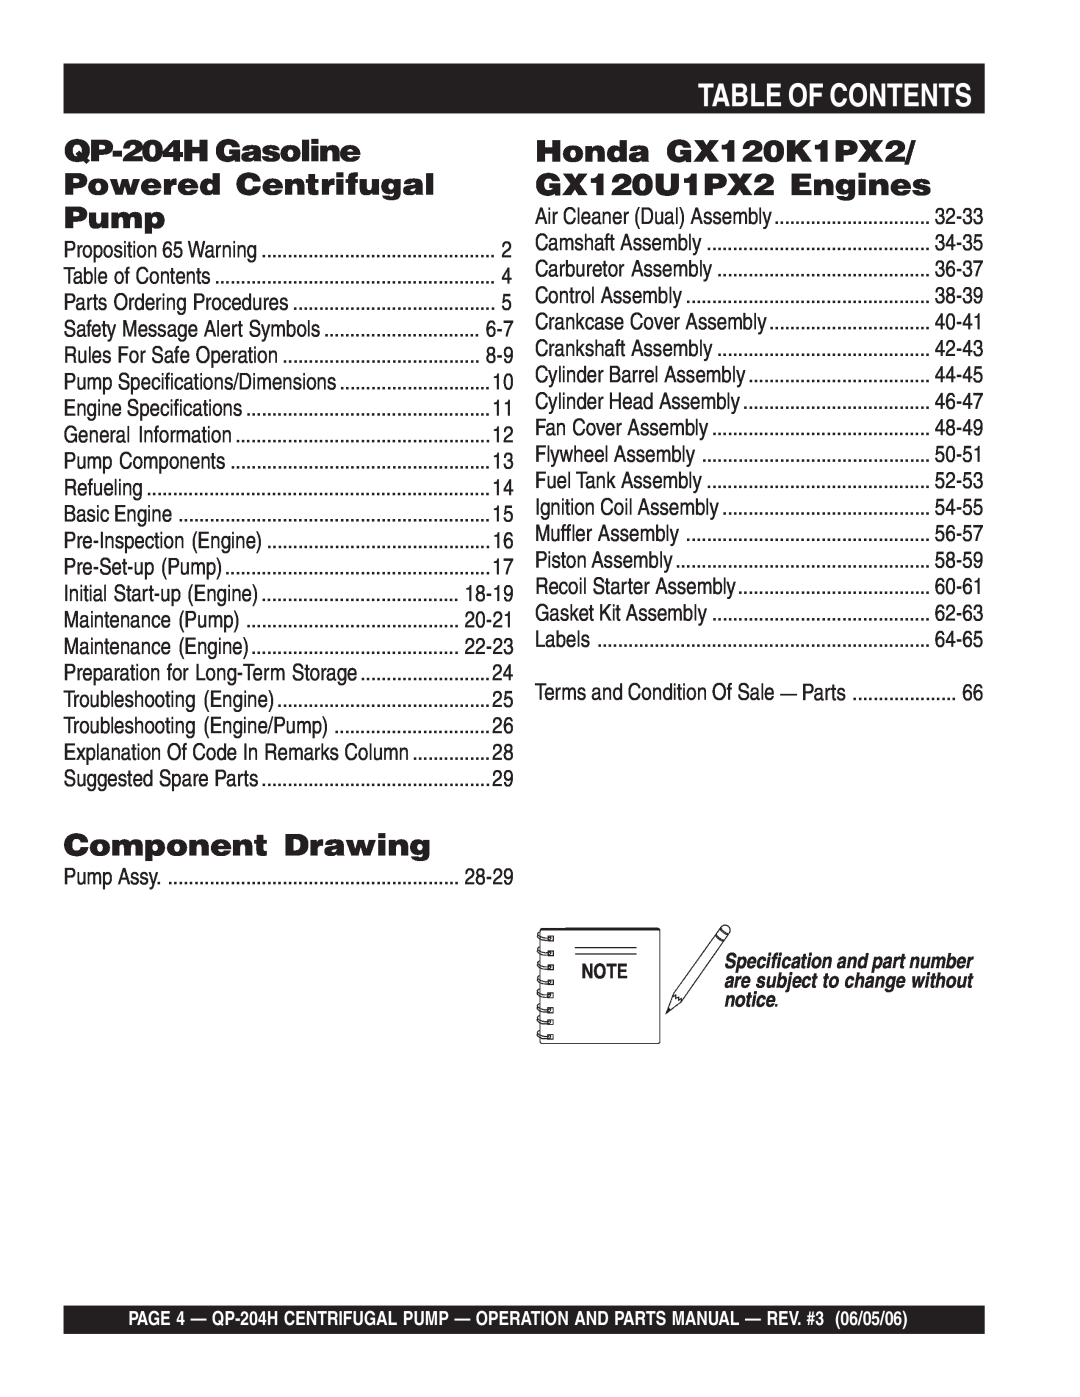 Multiquip manual Table Of Contents, QP-204HGasoline, Powered Centrifugal, Pump, Honda GX120K1PX2/ GX120U1PX2 Engines 